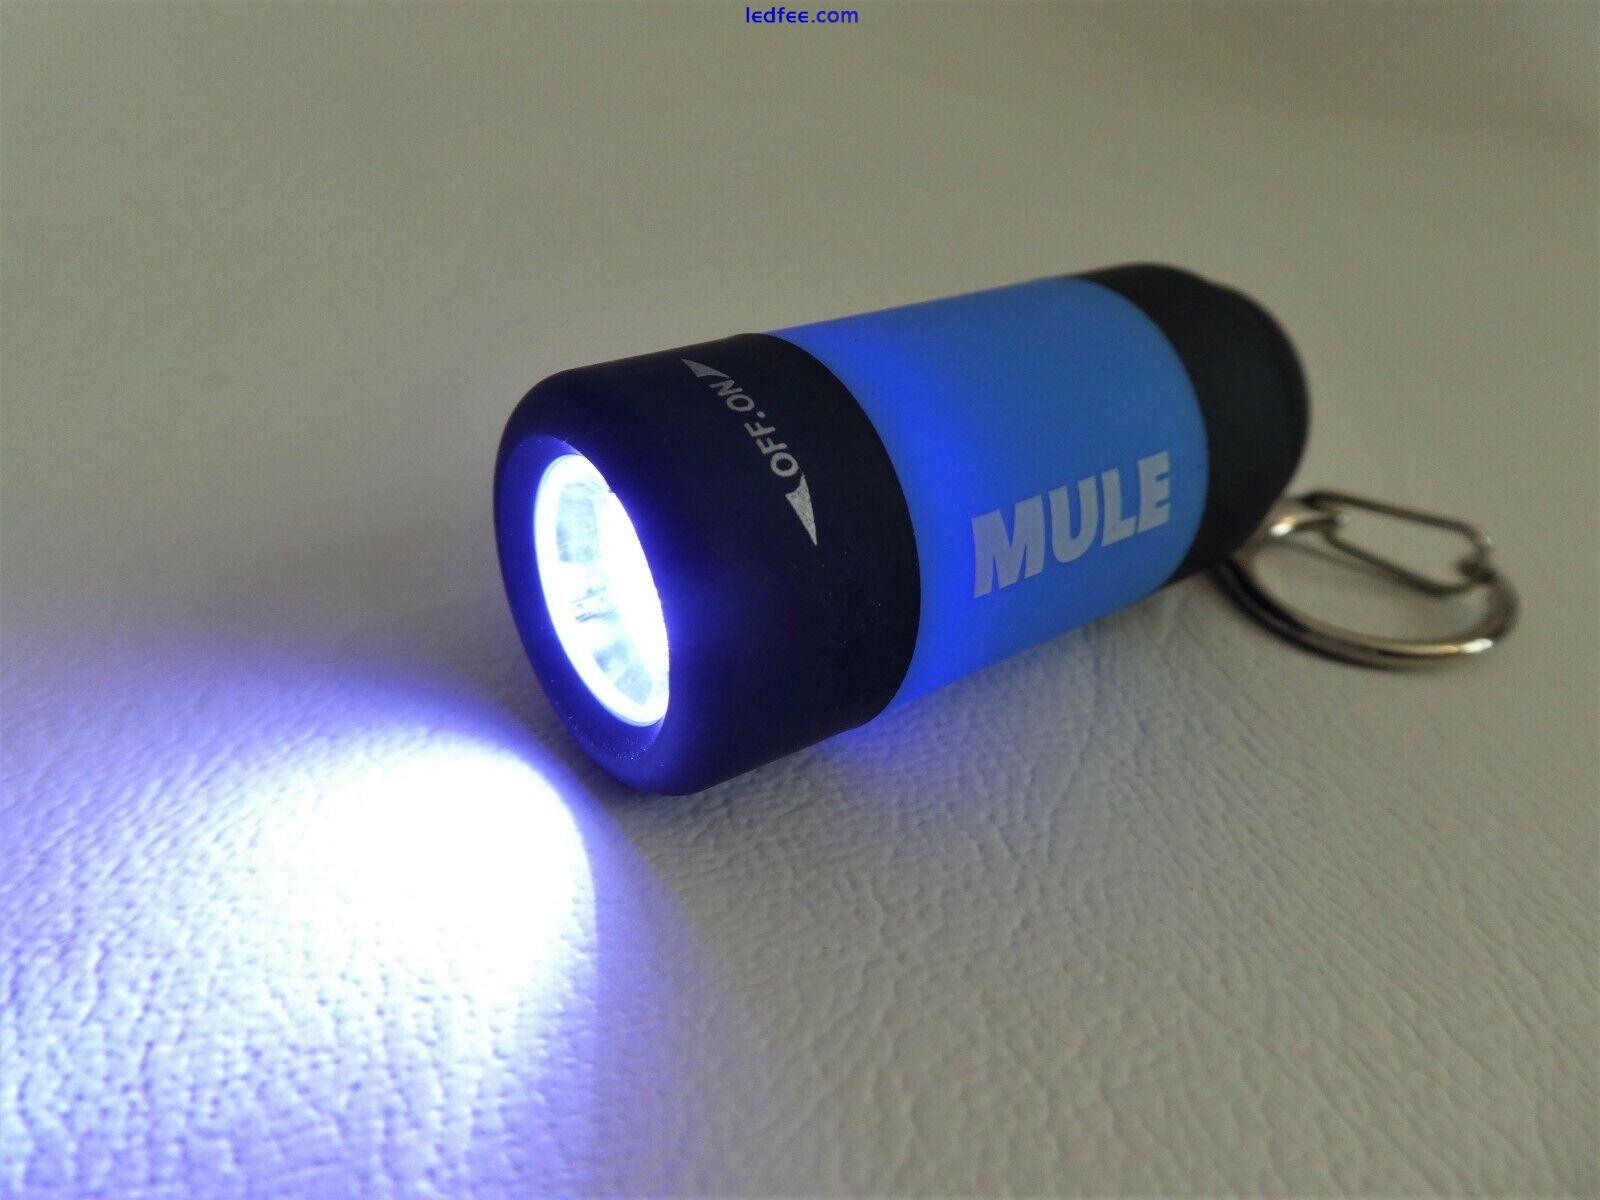 MULE Blue USB Rechargeable water resistant inspection torch key-ring EDC 1 